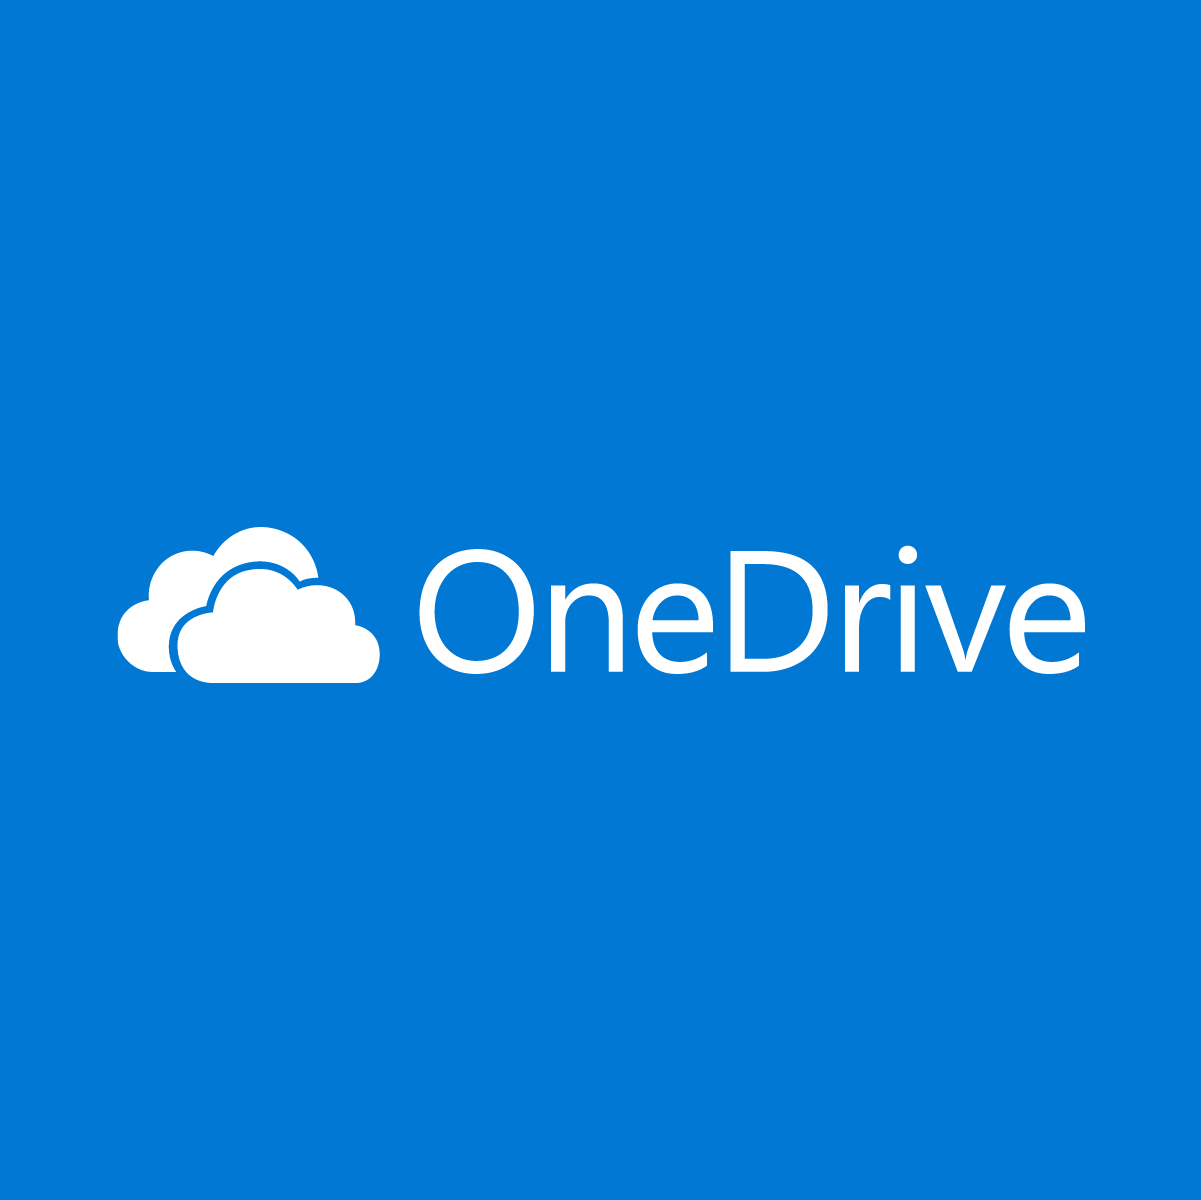 onedrive isnt signed in